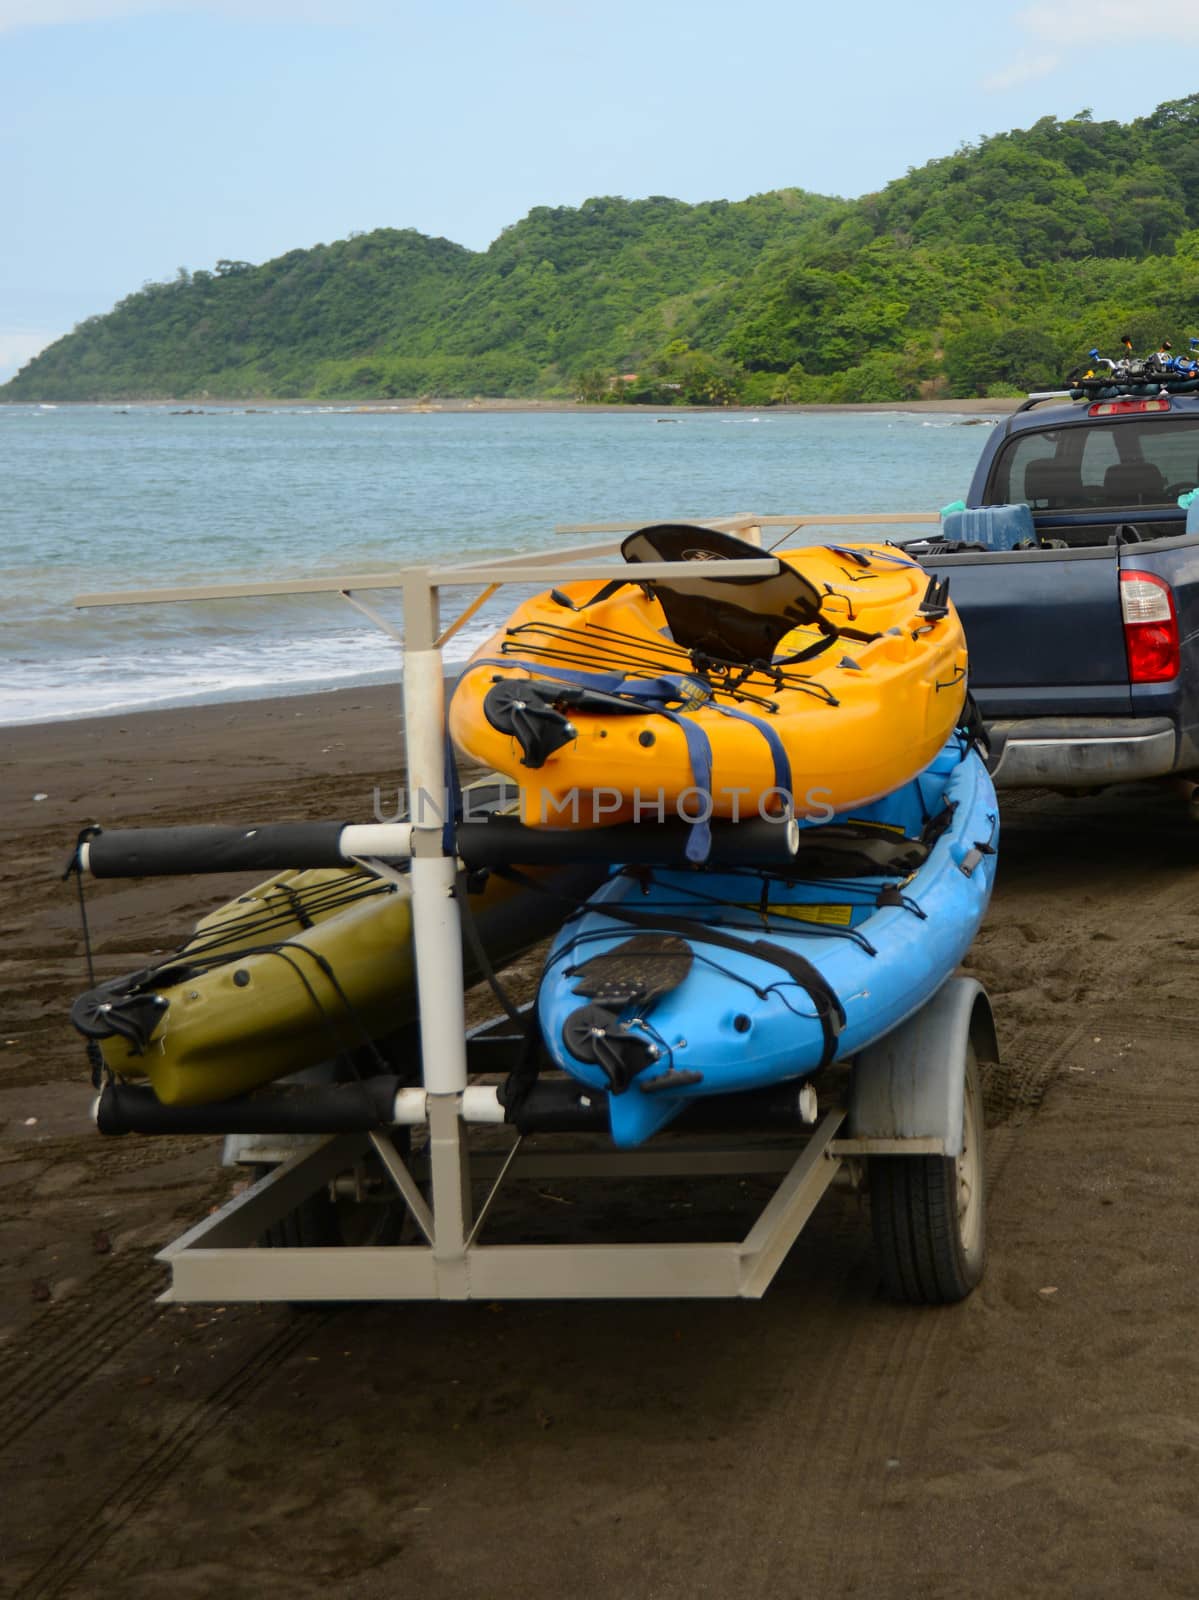 kayaks being pulled up to ocean on trailer and a truck